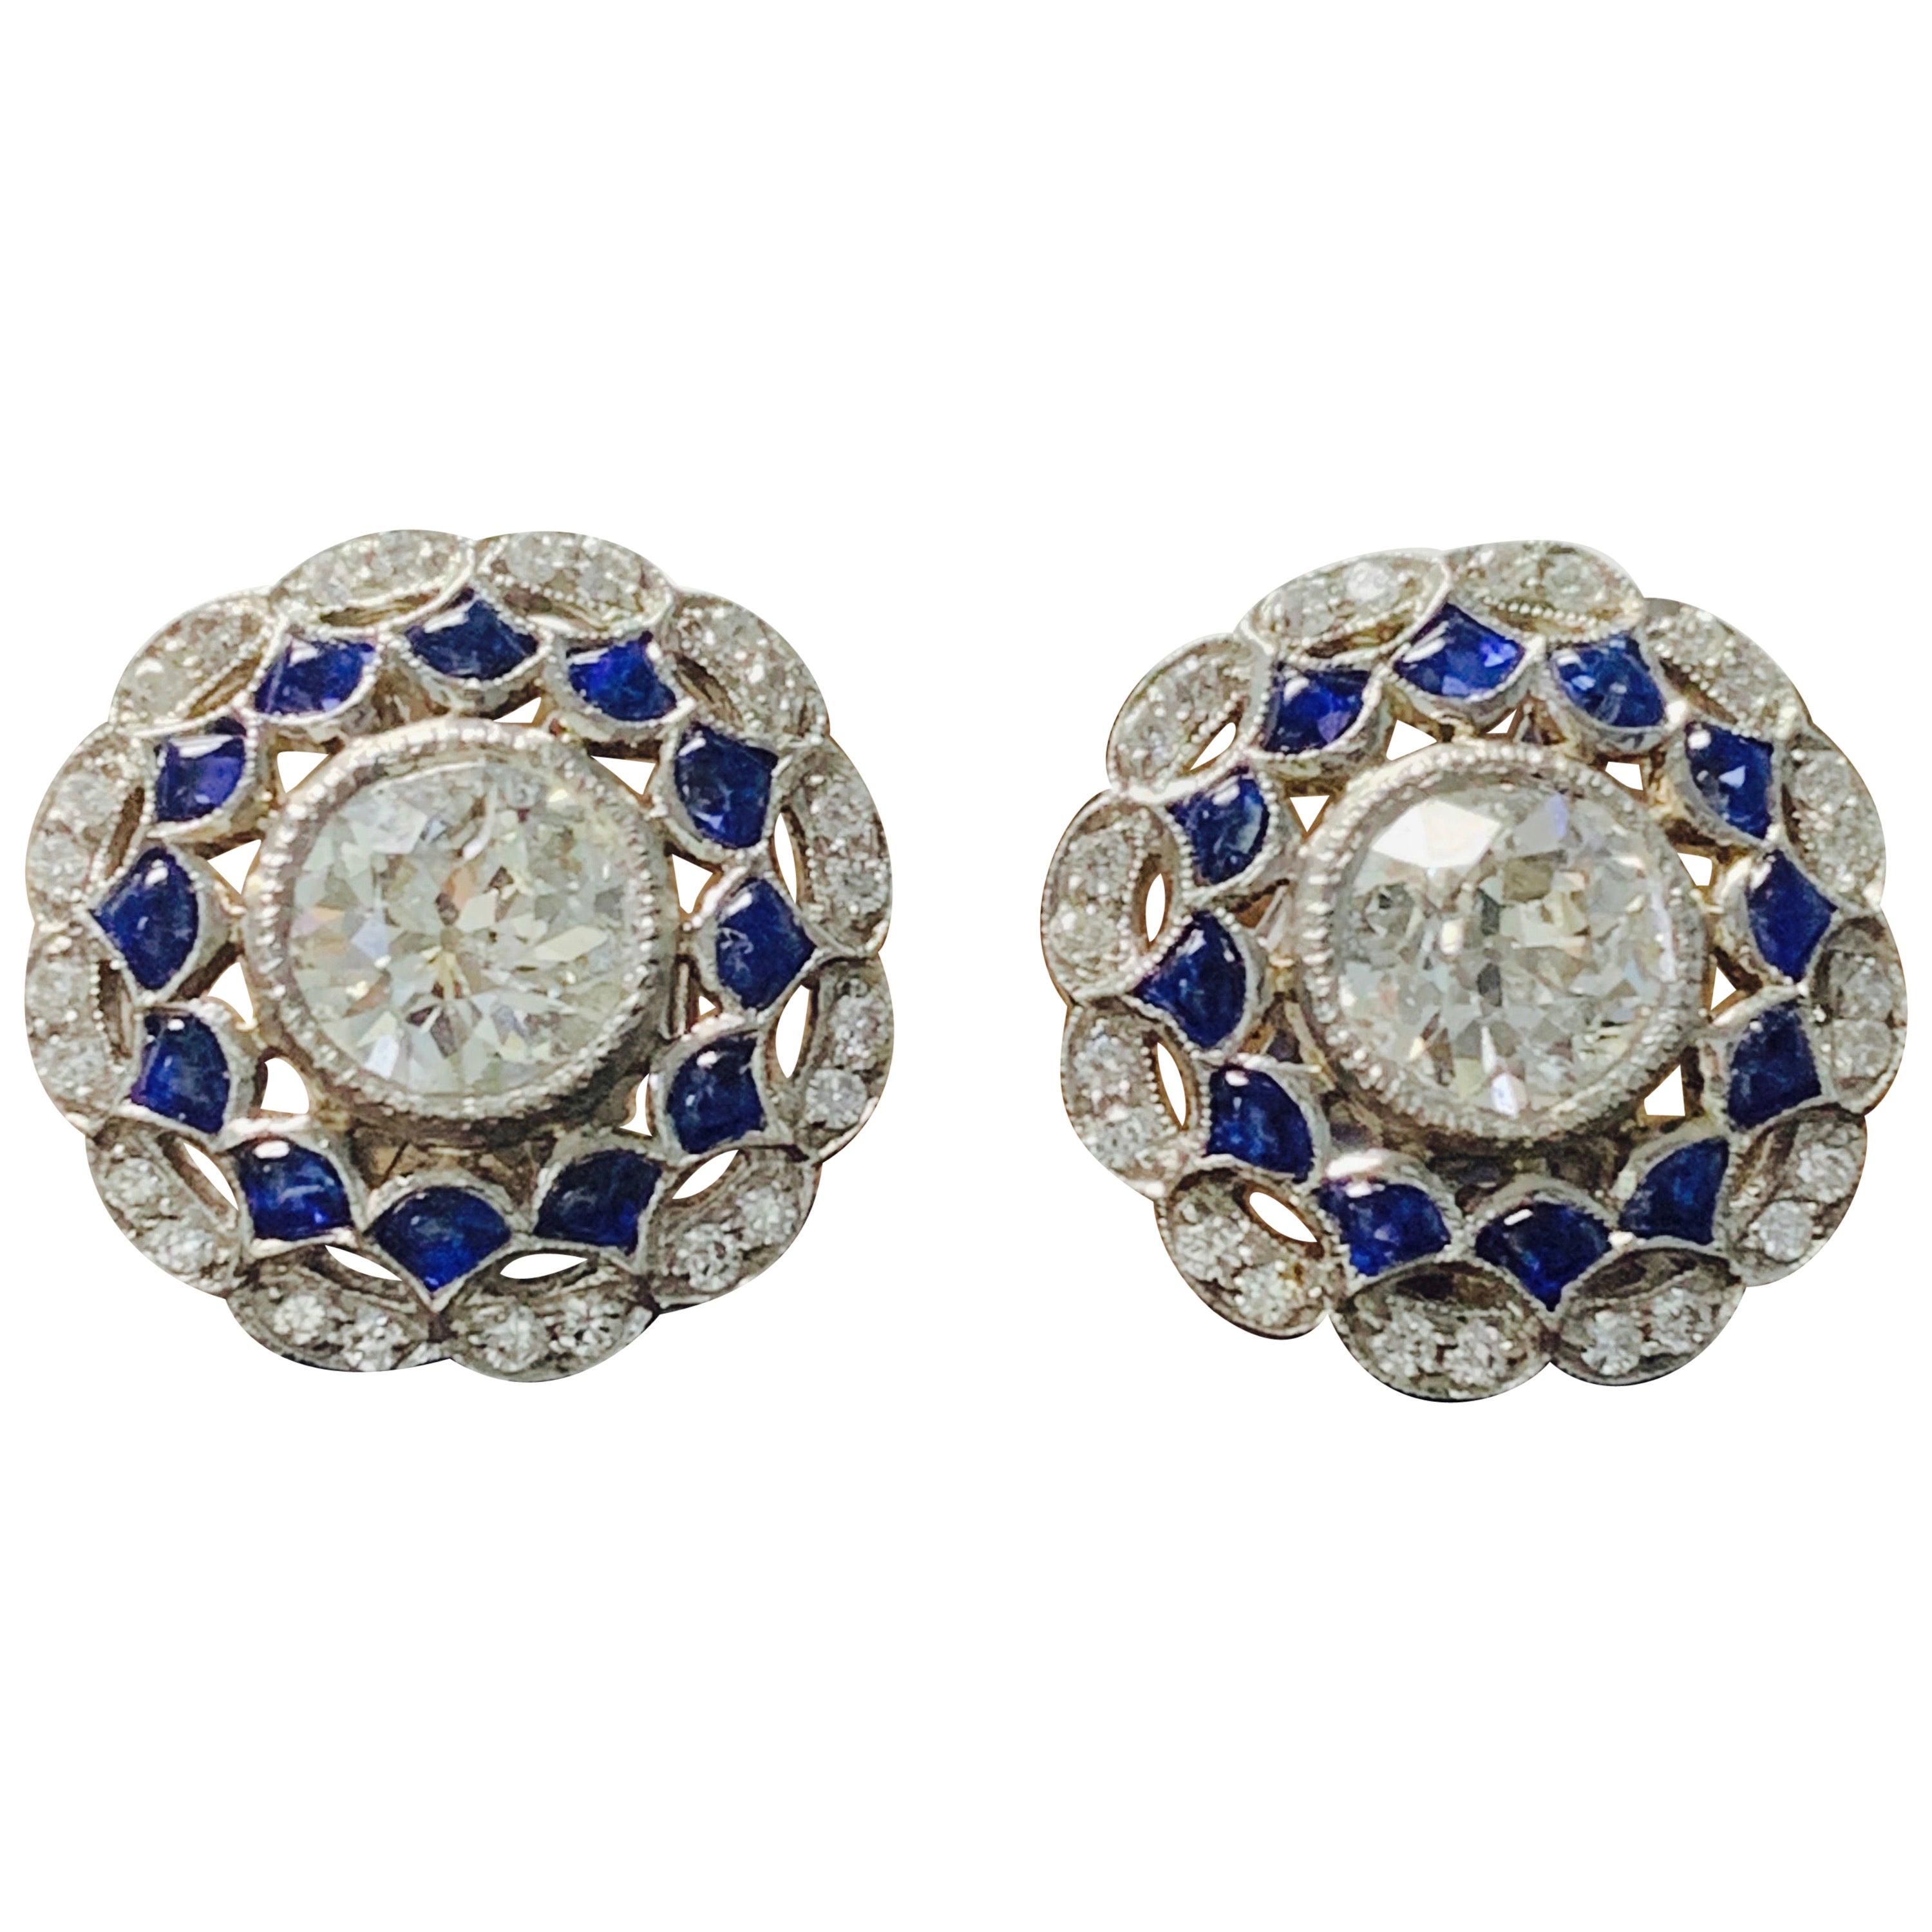 White Old European Cut Diamond and Blue Sapphire Stud Earrings in Platinum For Sale